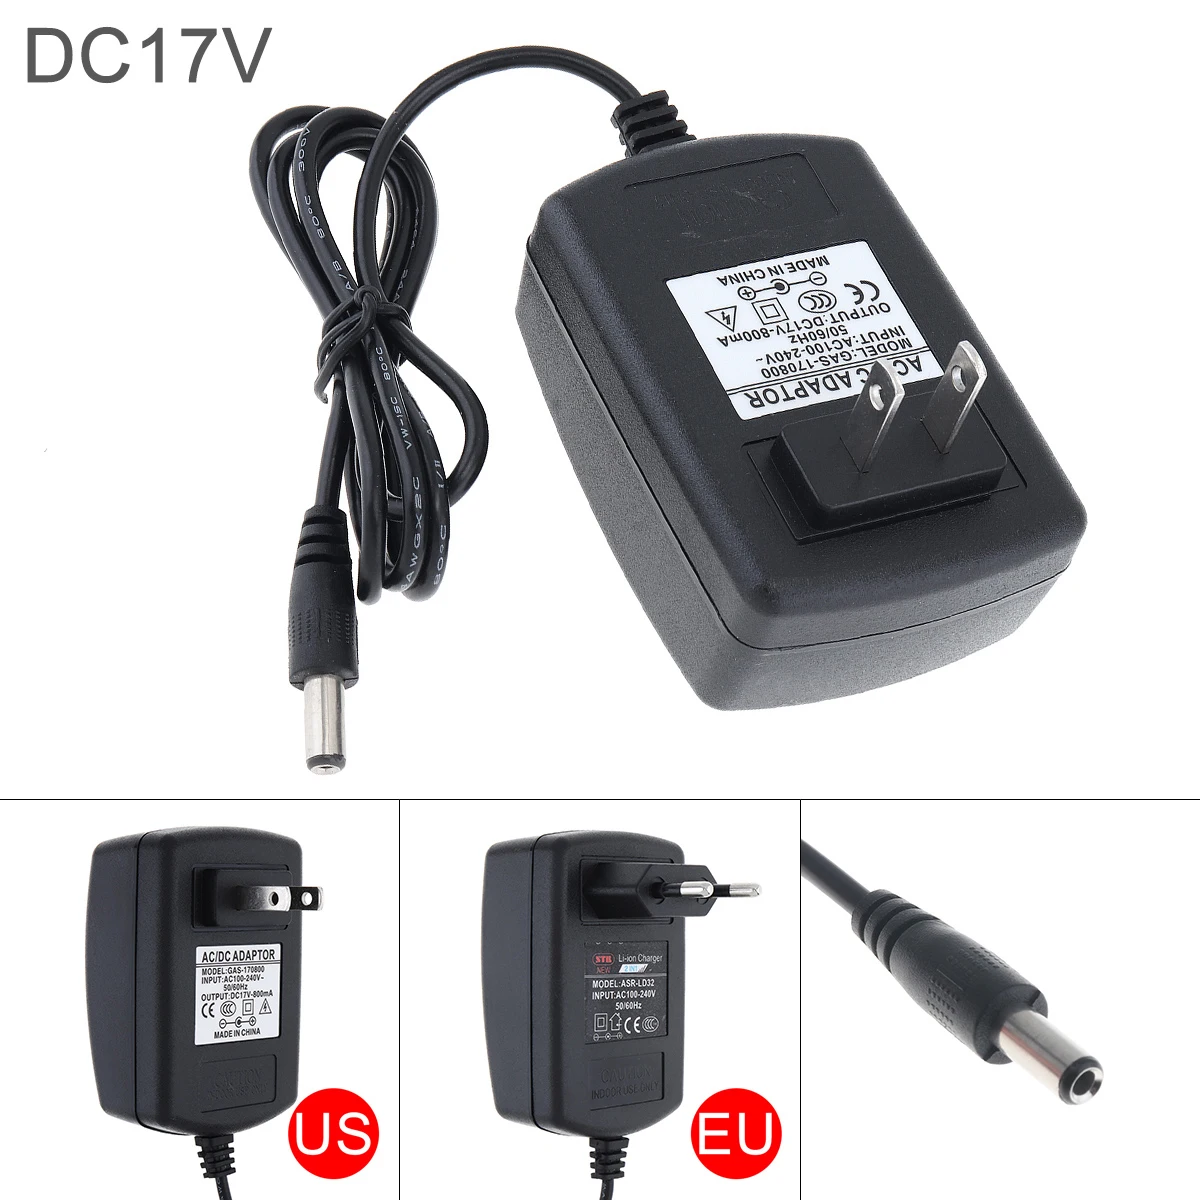 80cm Universal DC 16.8-17V Lithium Battery Rechargeable Charger 100-240V Power Supply for Lithium Electrical Drill Screwdriver universal digital battery tester checker for all battery c aa aaa d n 9v 6f22 and 1 5v button cell batteries electrical equipment requires no battery for operation